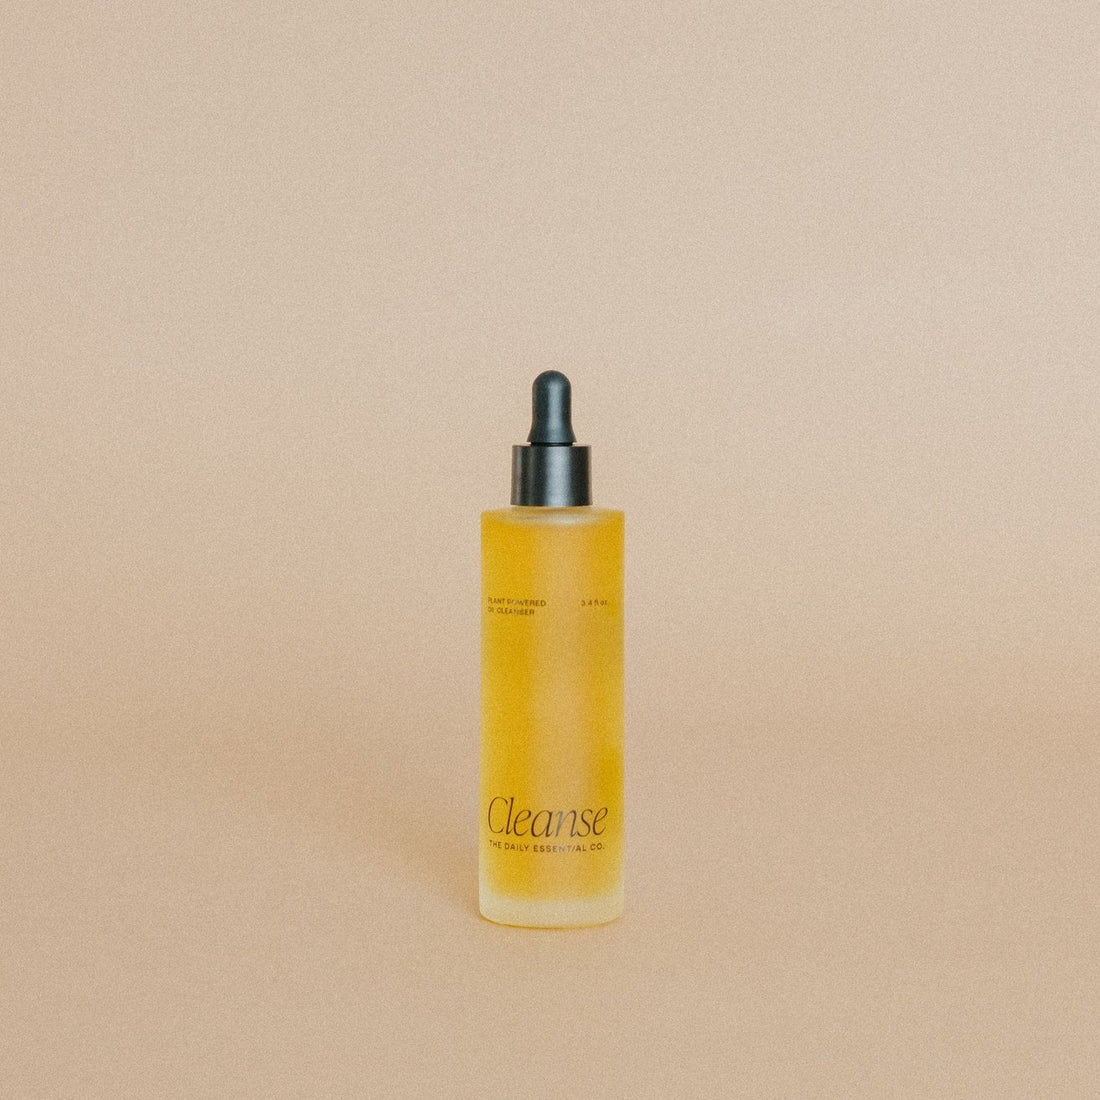 Cleanse // Facial Oil Cleanser